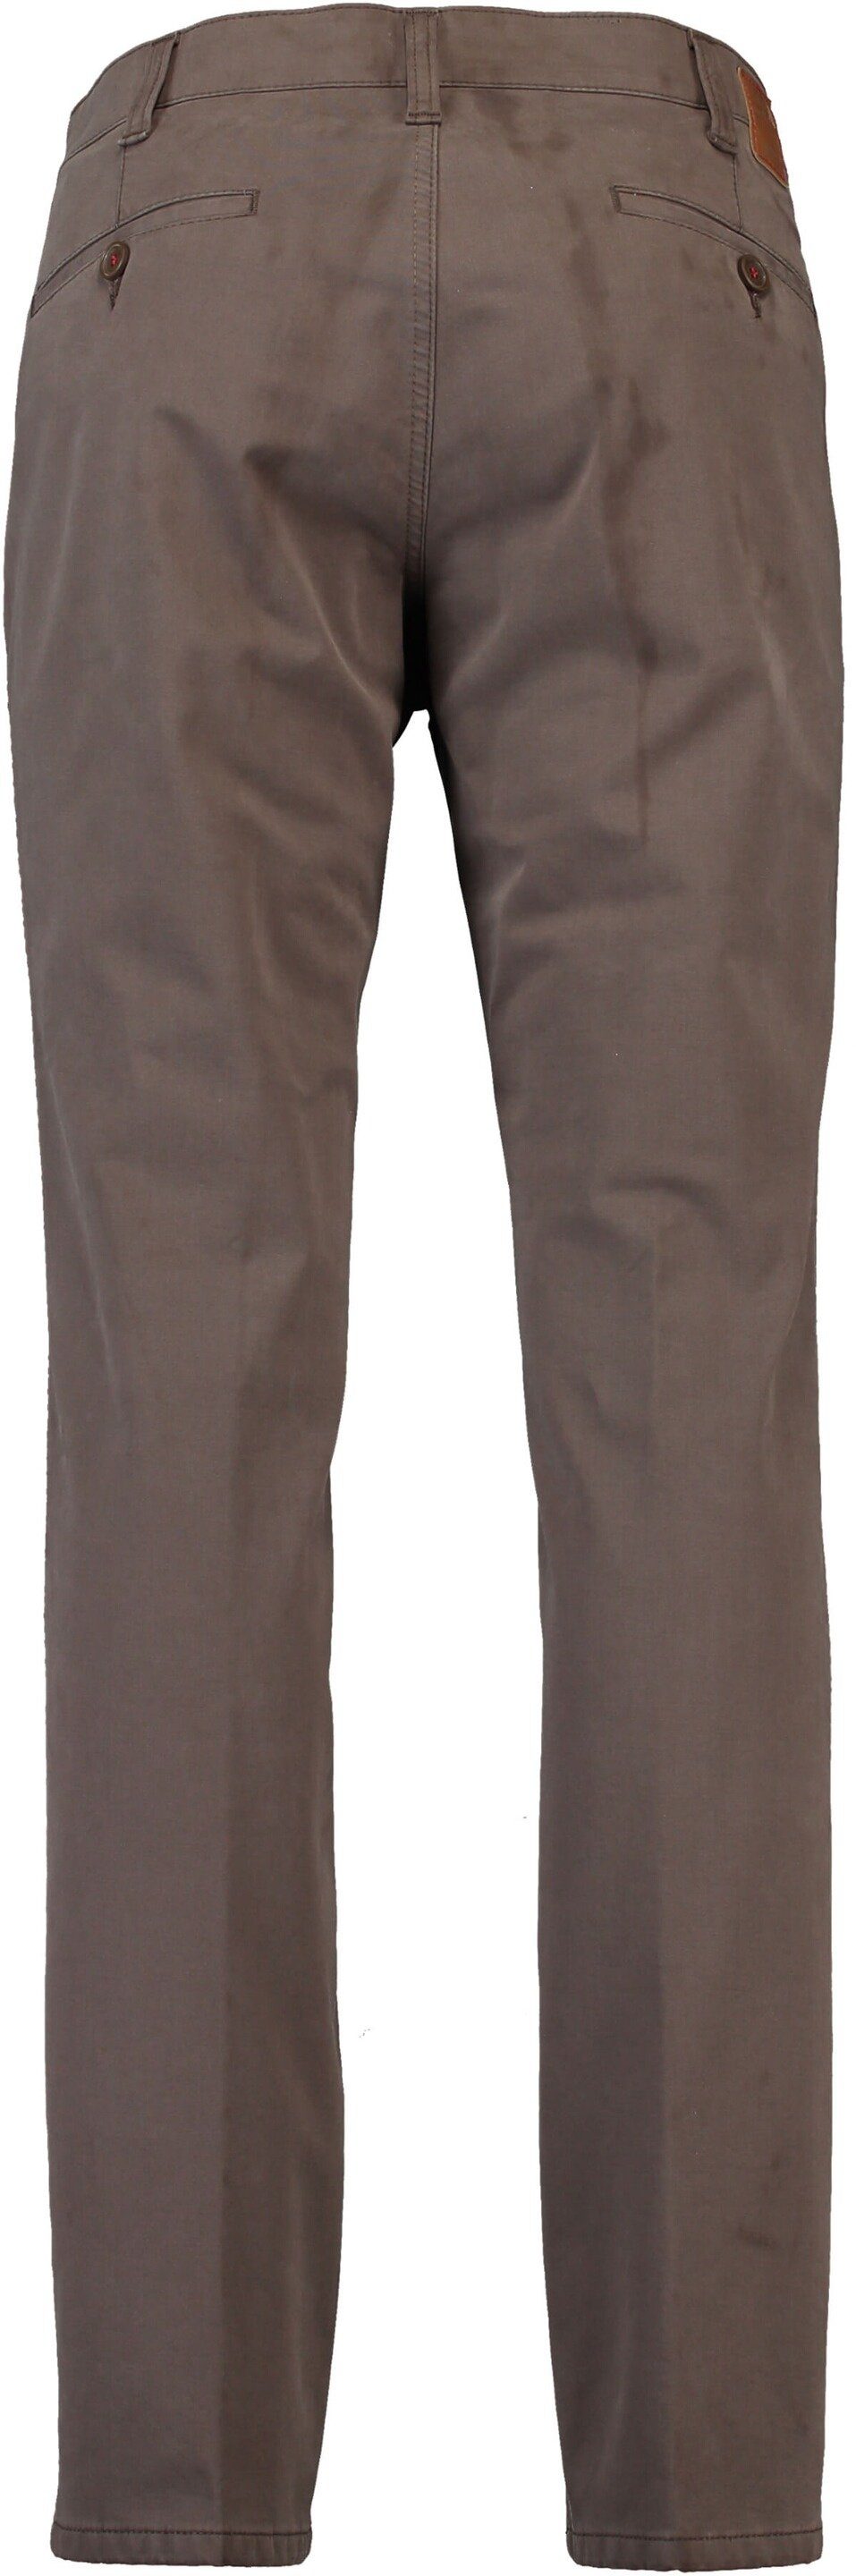 Club Thermohose Comfort schlamm of